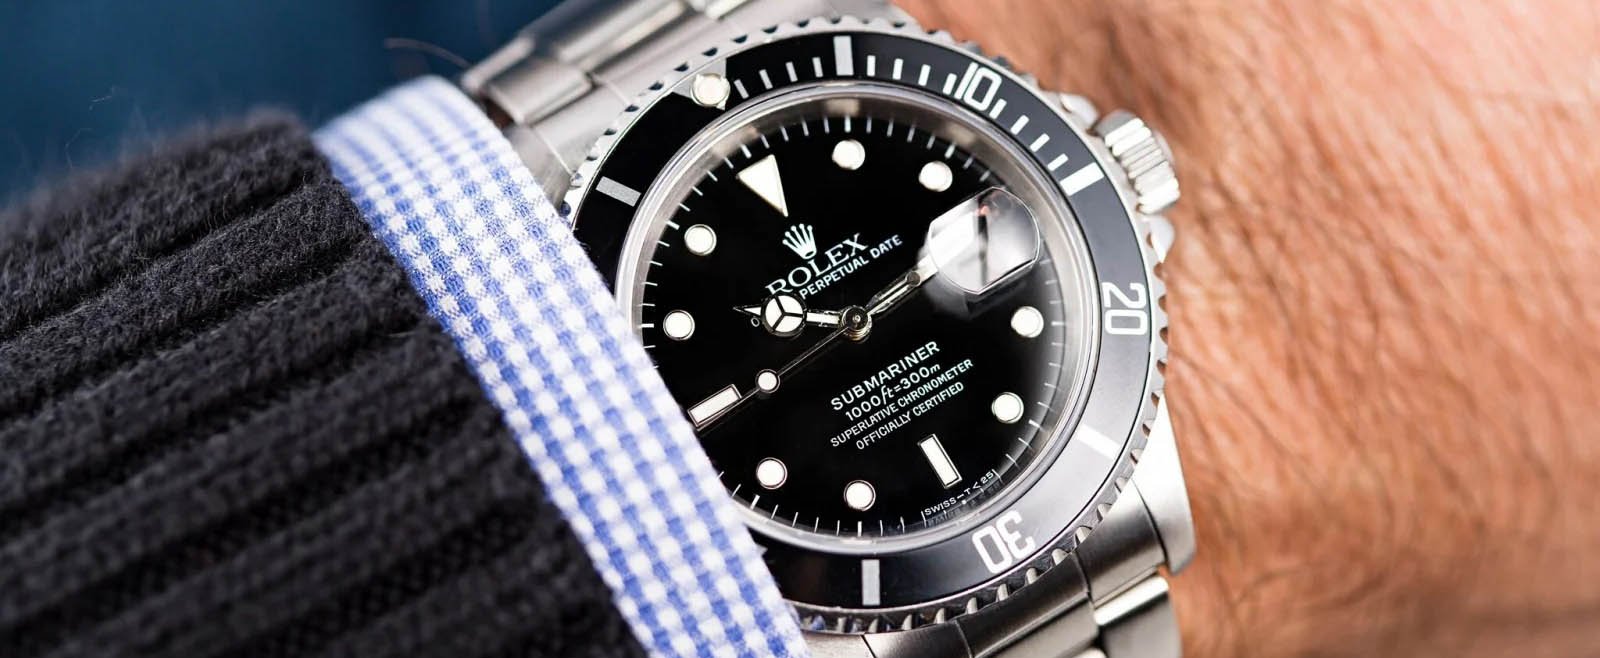 3 Types of Rolex Watches Every Classy Man Should Own